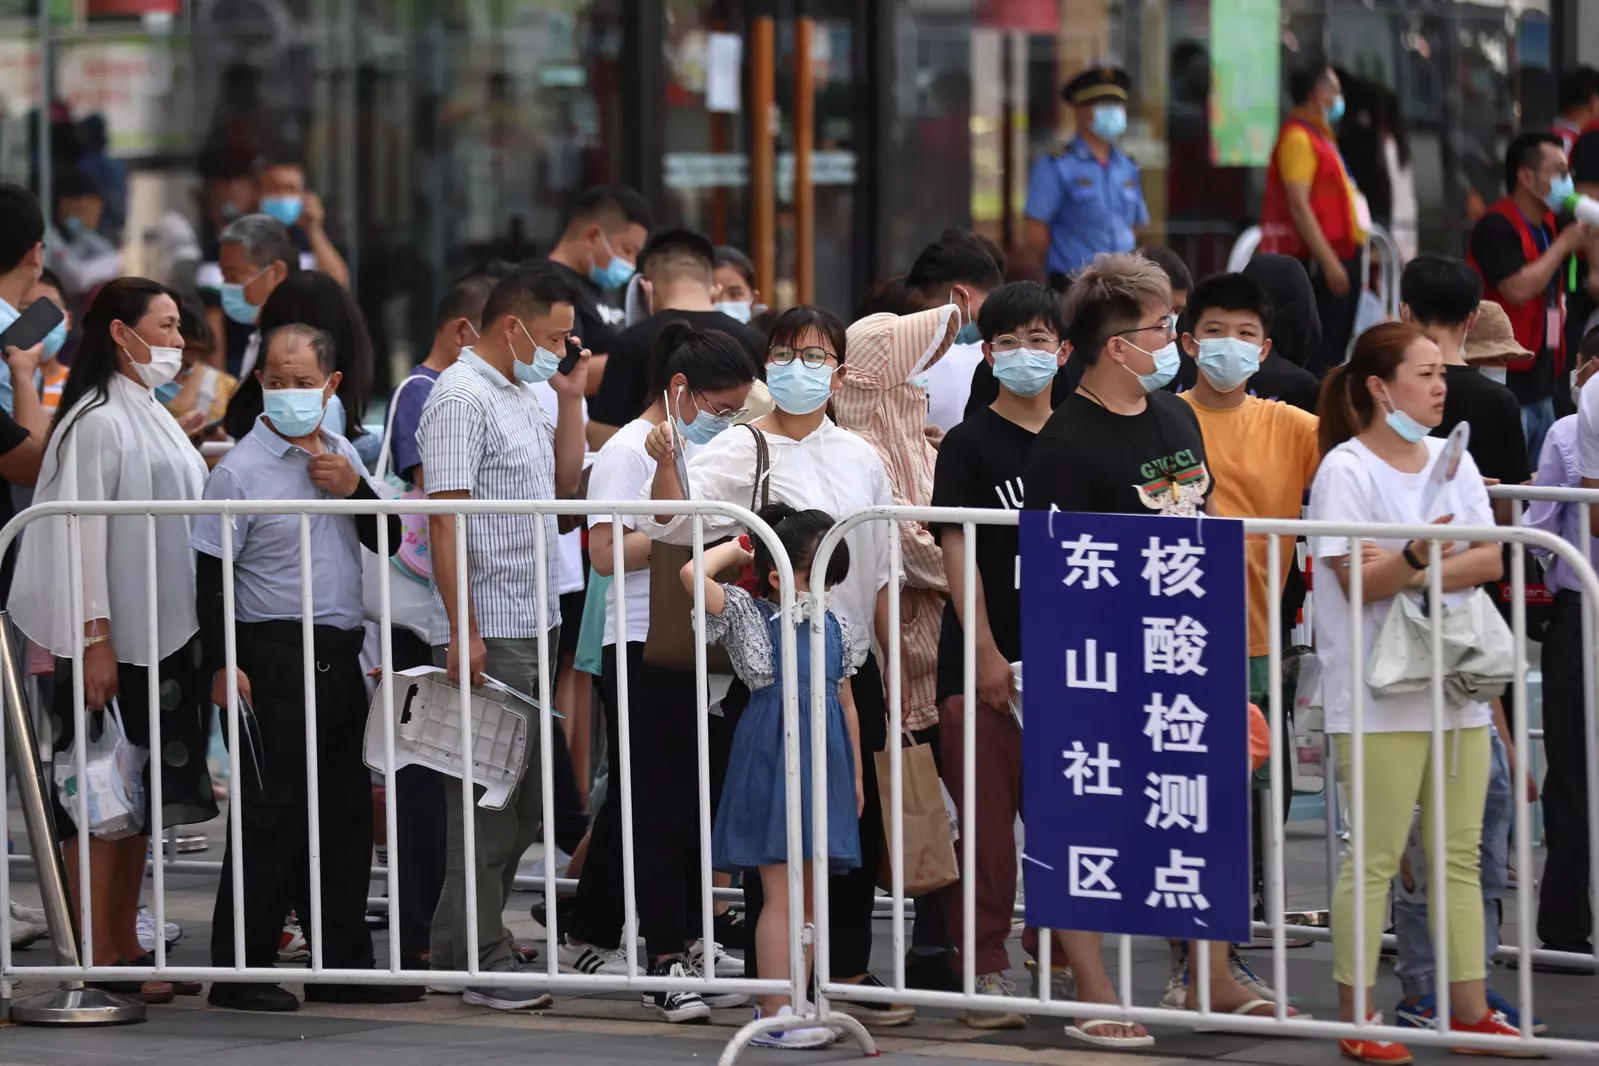 Two more parts of China report coronavirus outbreaks